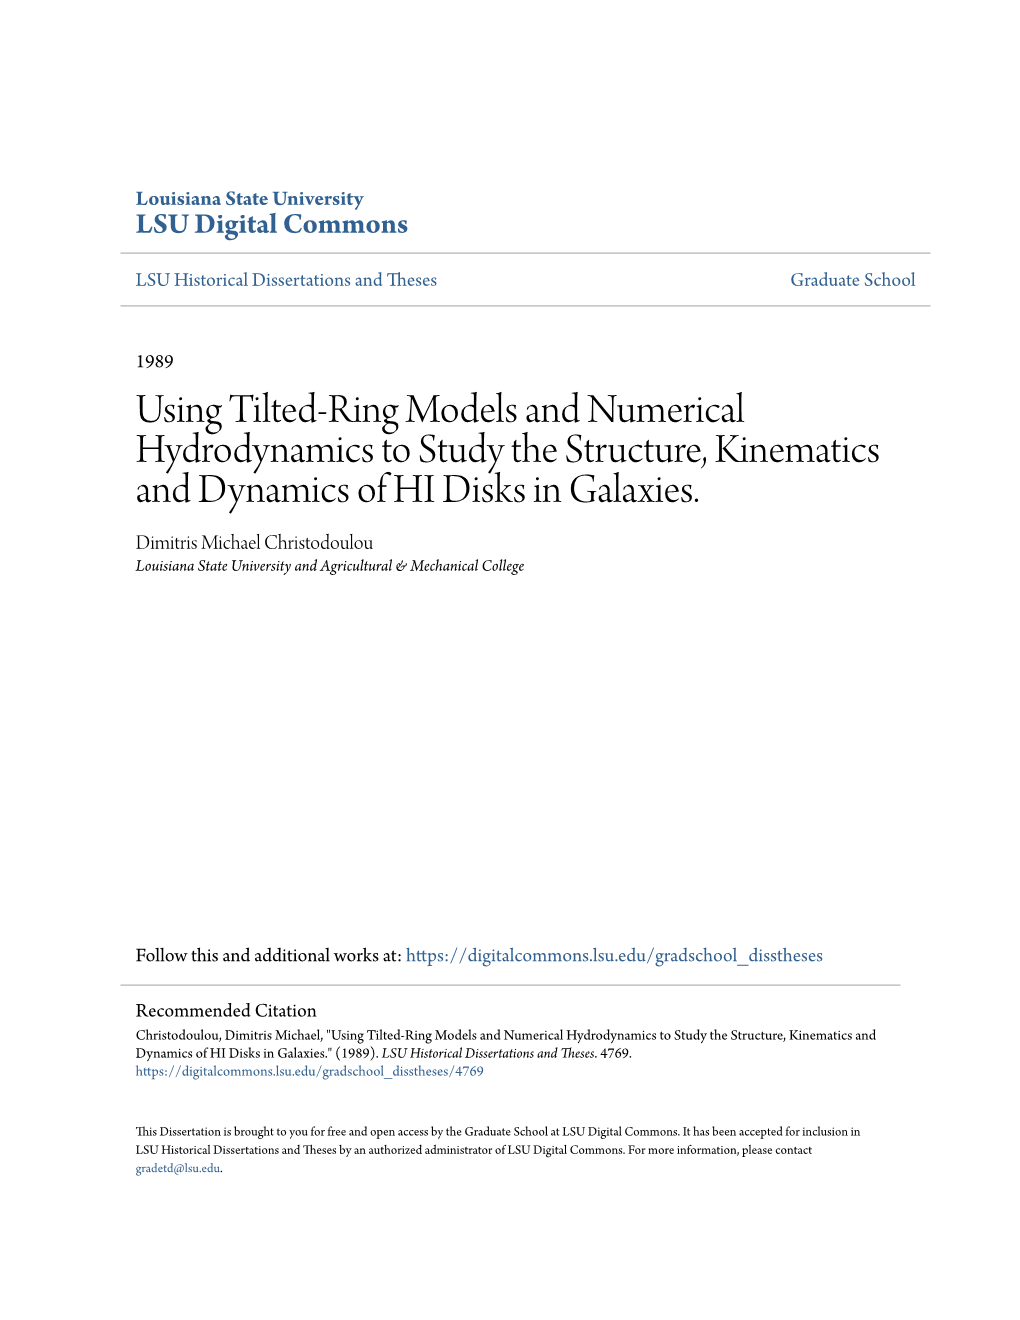 Using Tilted-Ring Models and Numerical Hydrodynamics to Study the Structure, Kinematics and Dynamics of HI Disks in Galaxies